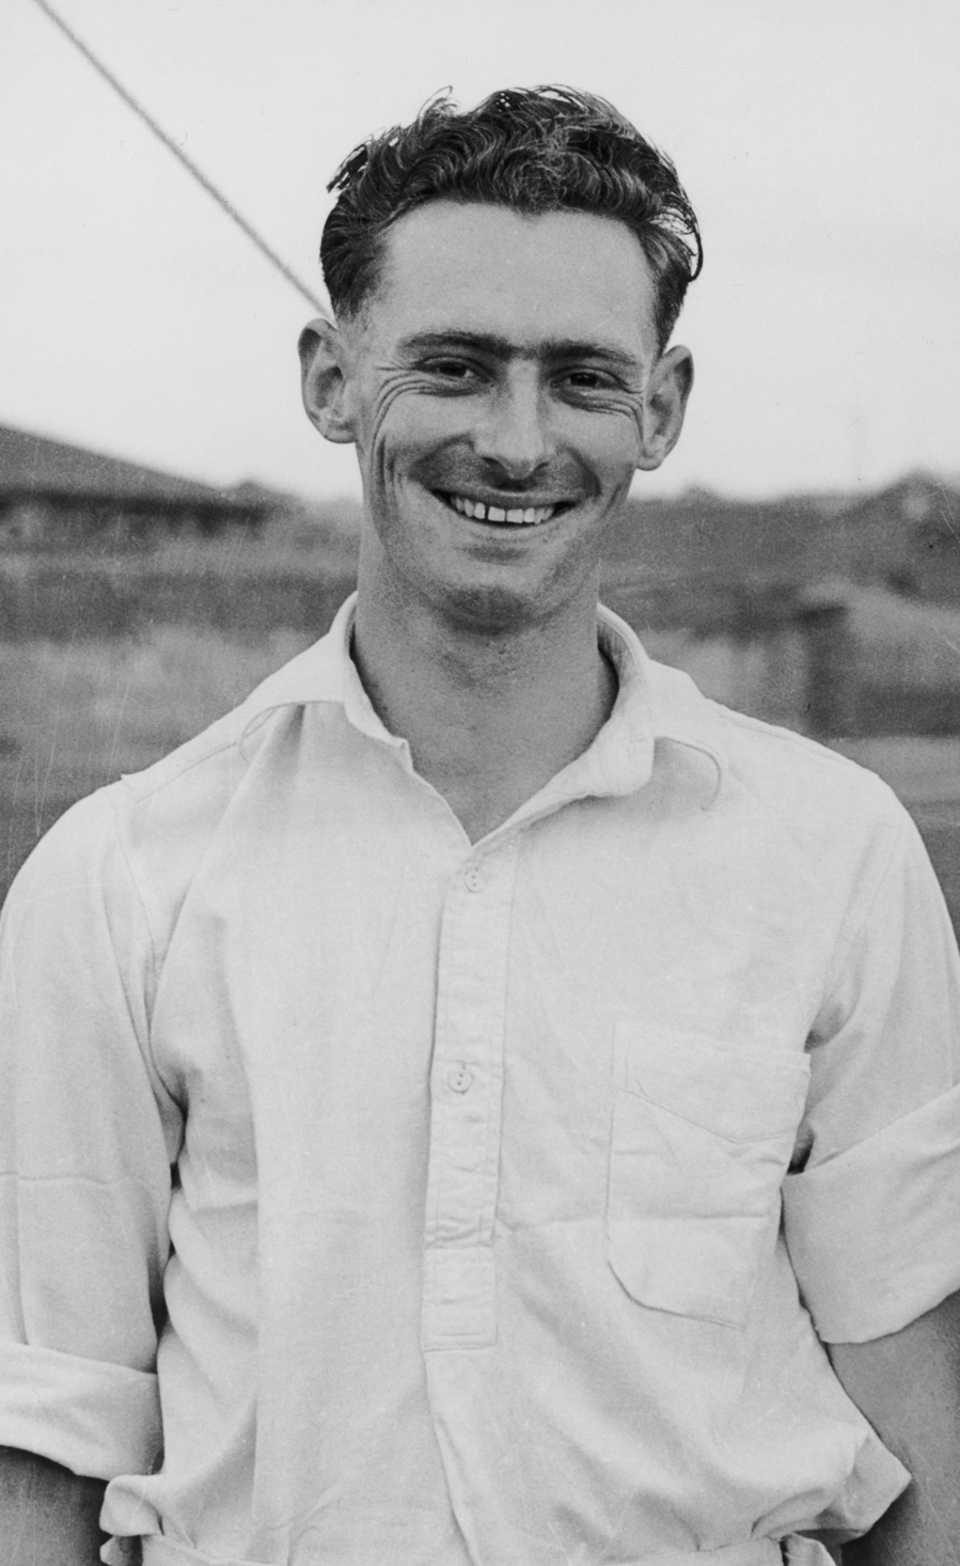 Brian Booth on his maiden tour to England, August 1, 1961